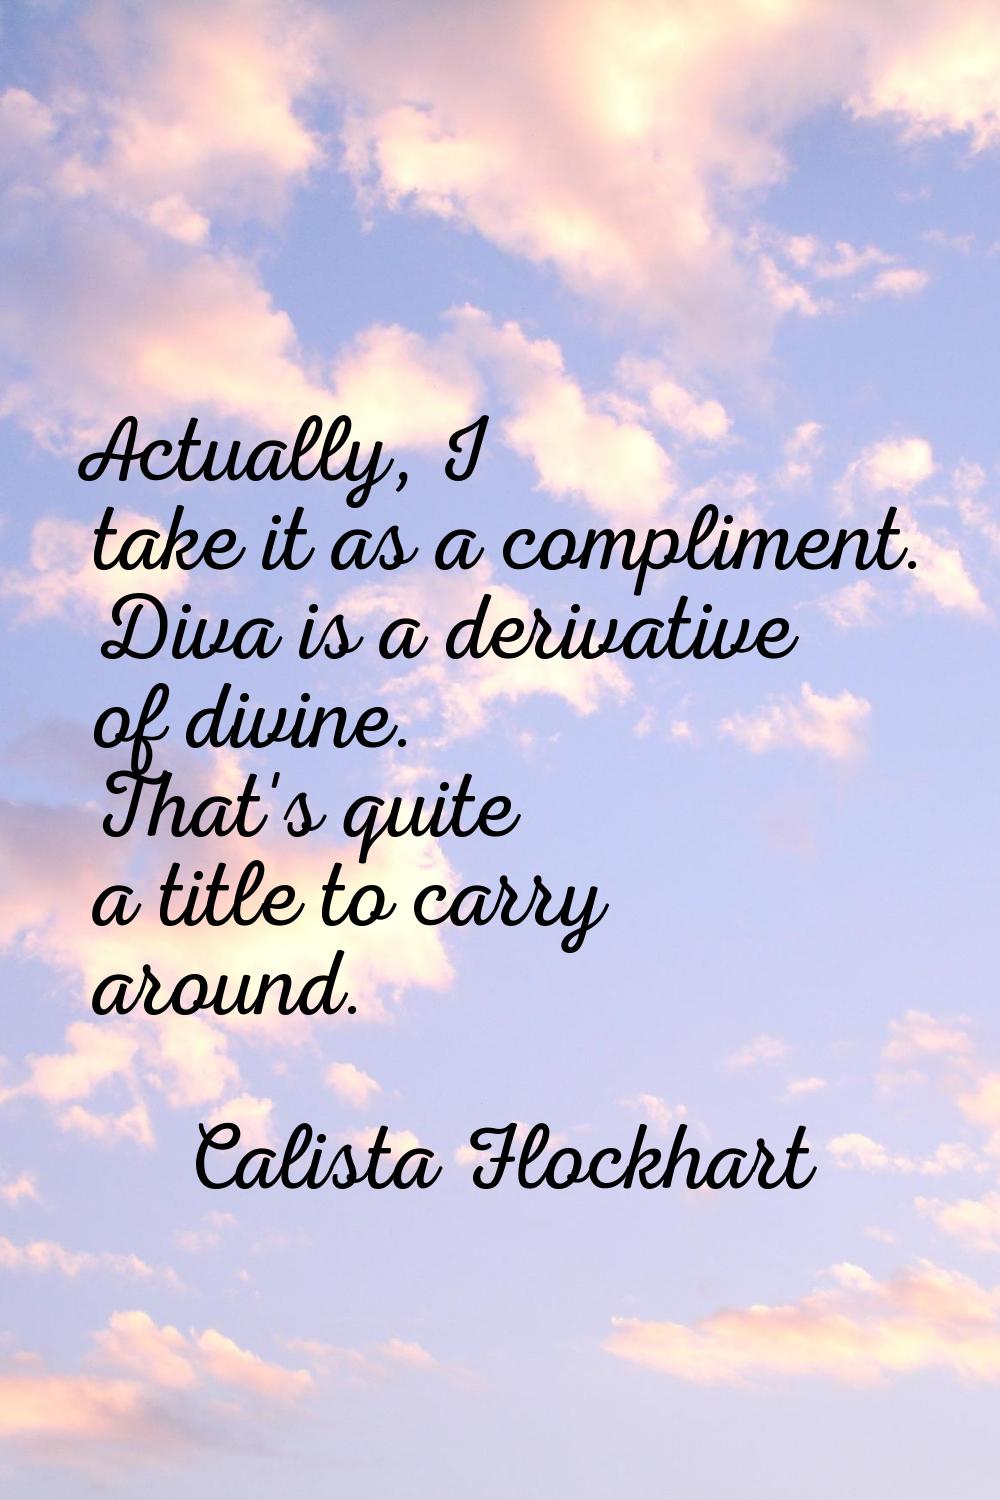 Actually, I take it as a compliment. Diva is a derivative of divine. That's quite a title to carry 